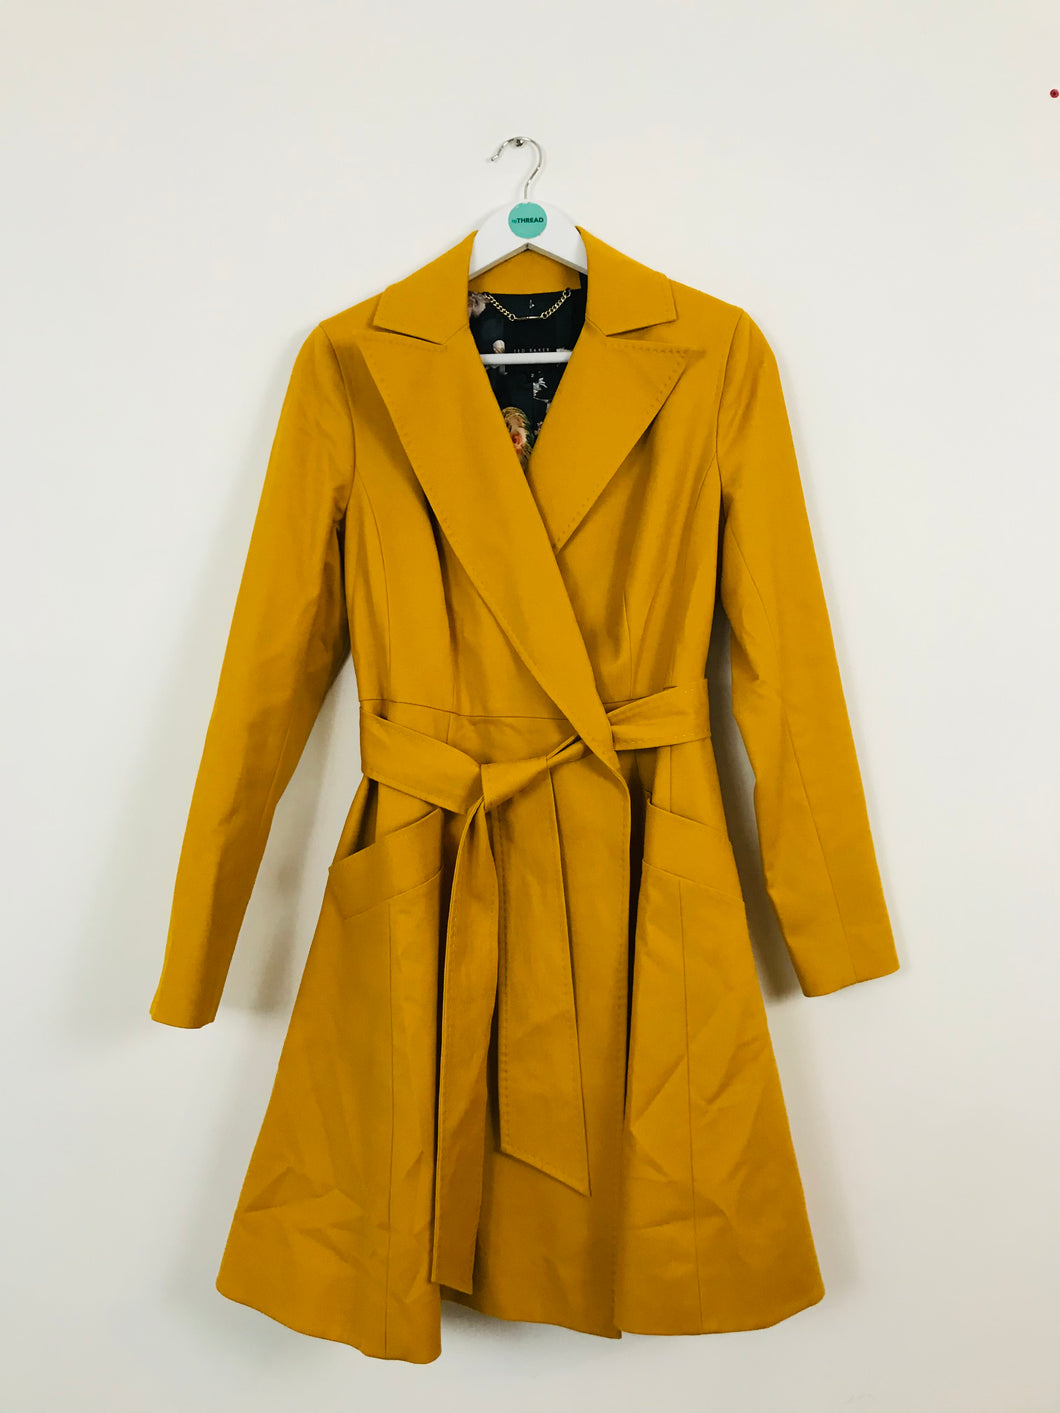 Ted Baker Women’s A-Line Trench Coat | 2 UK10 | Mustard Yellow